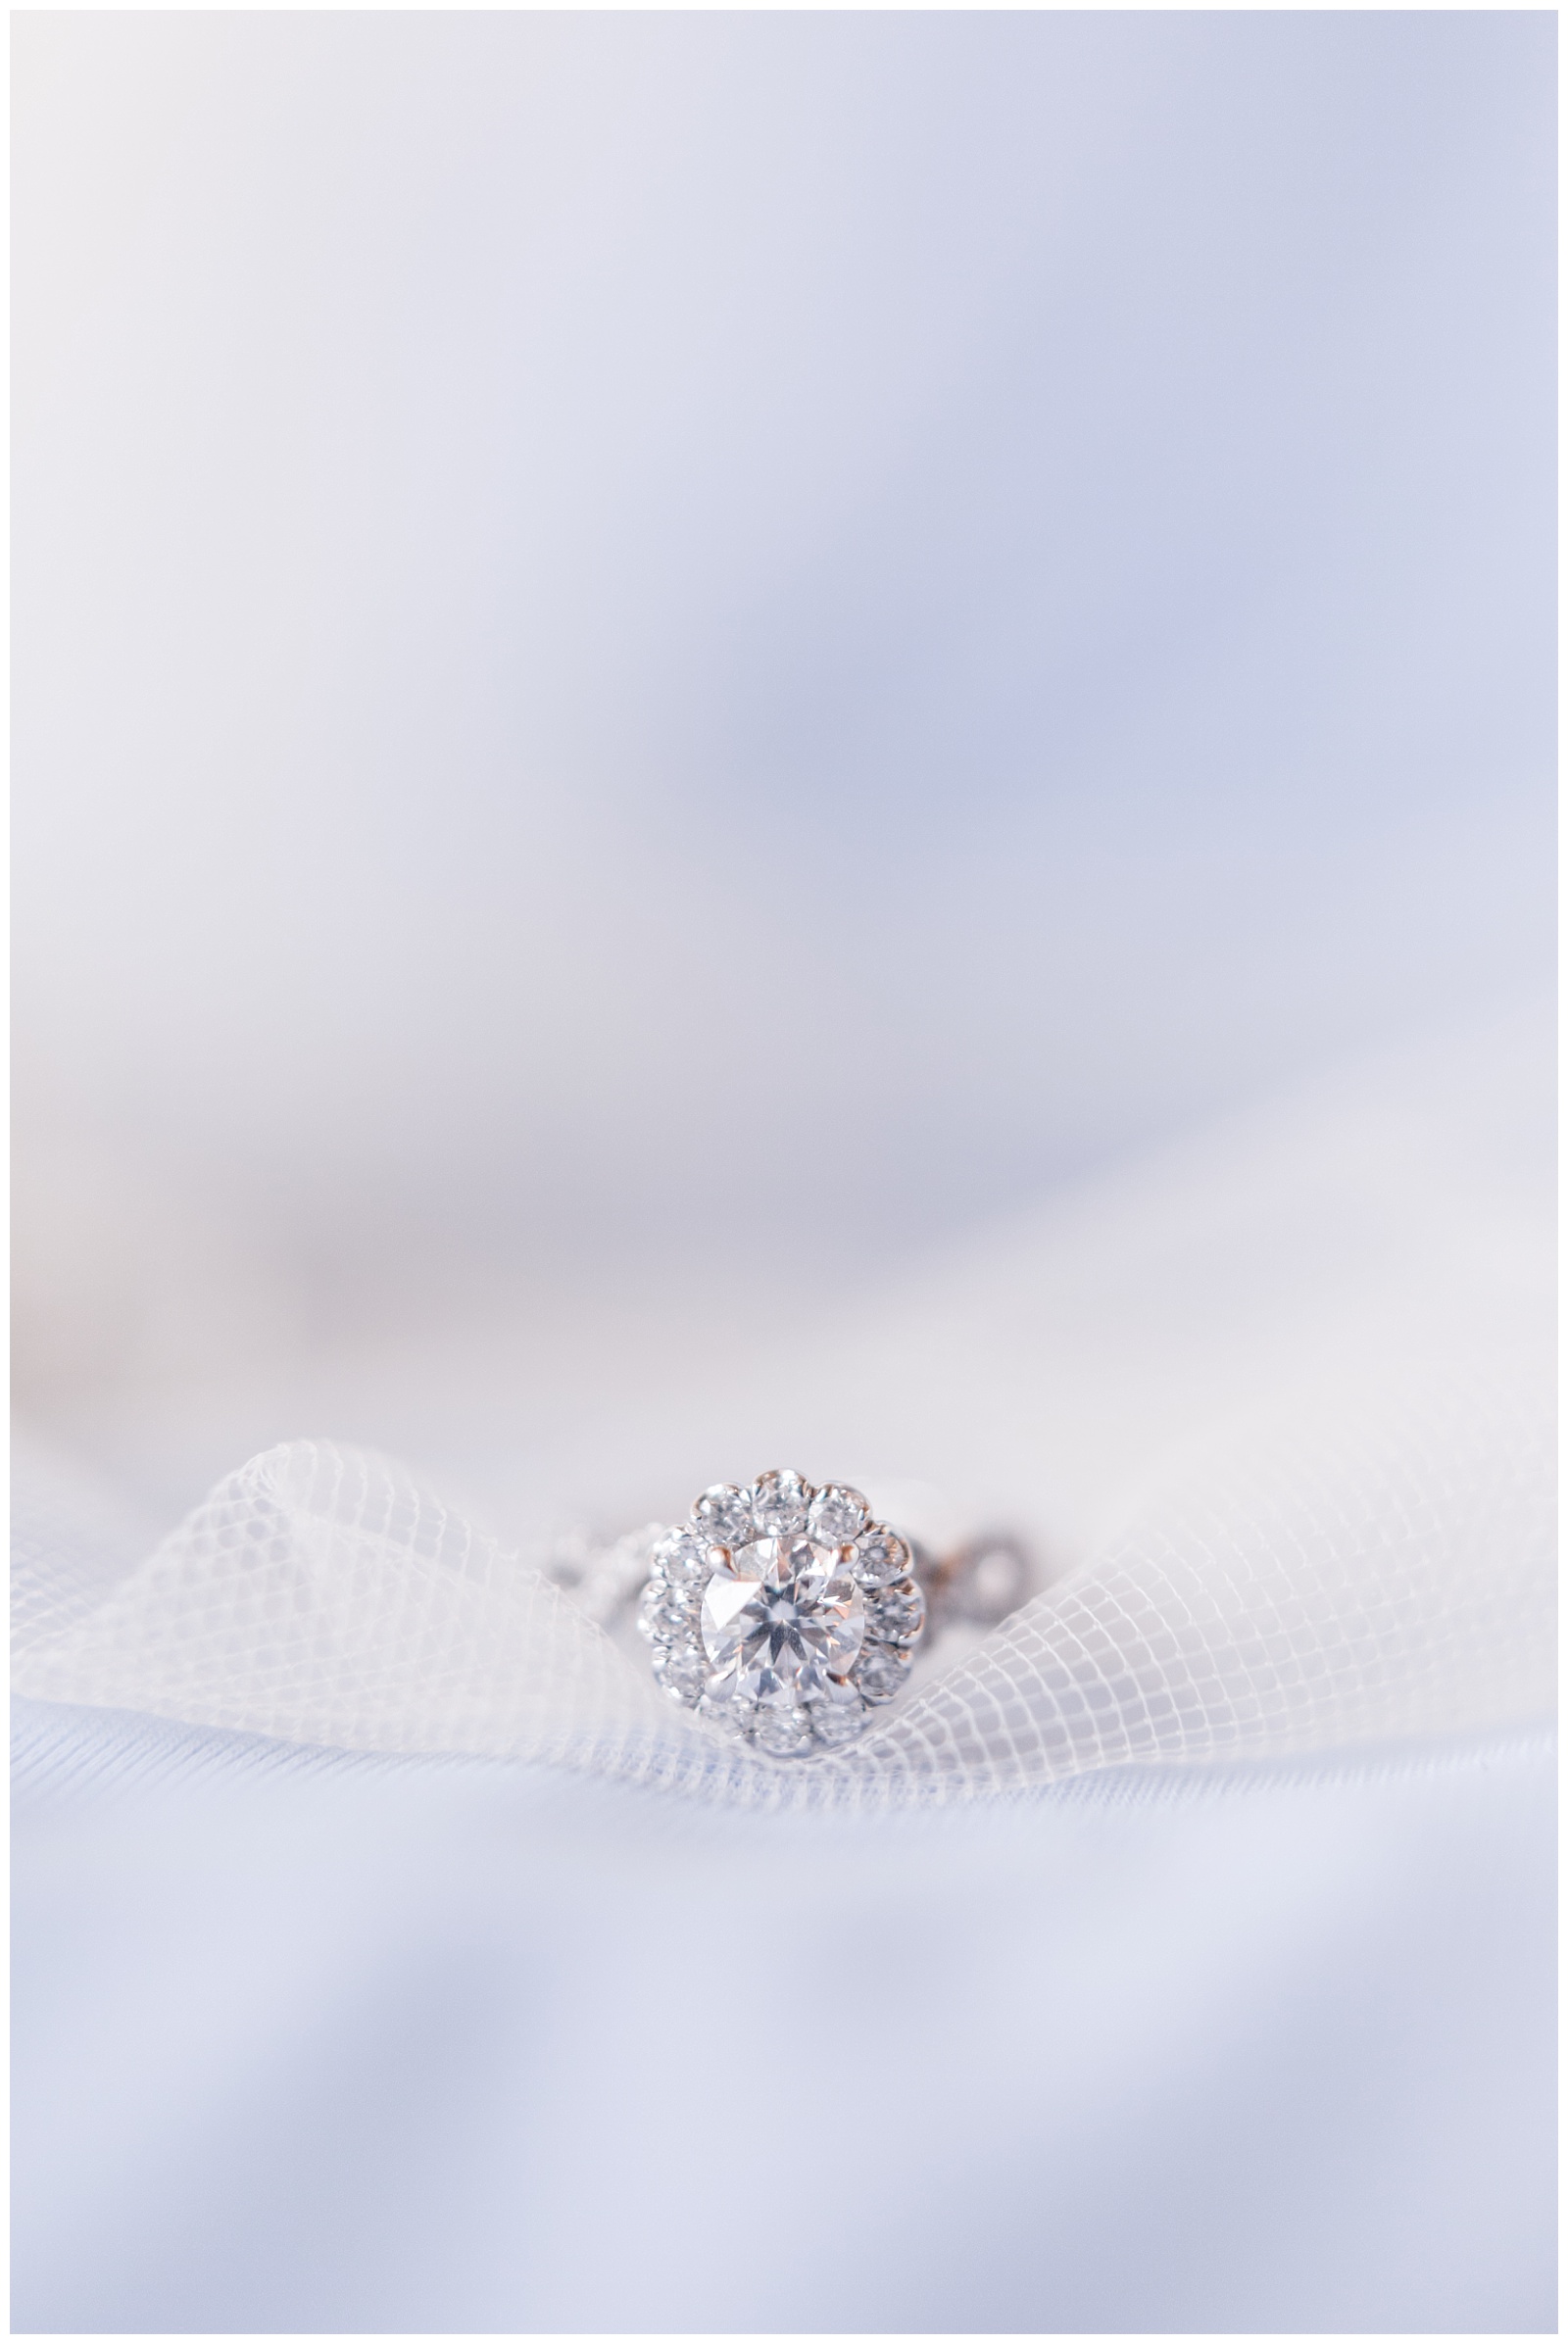 light blue wedding details with silver diamond right and veil